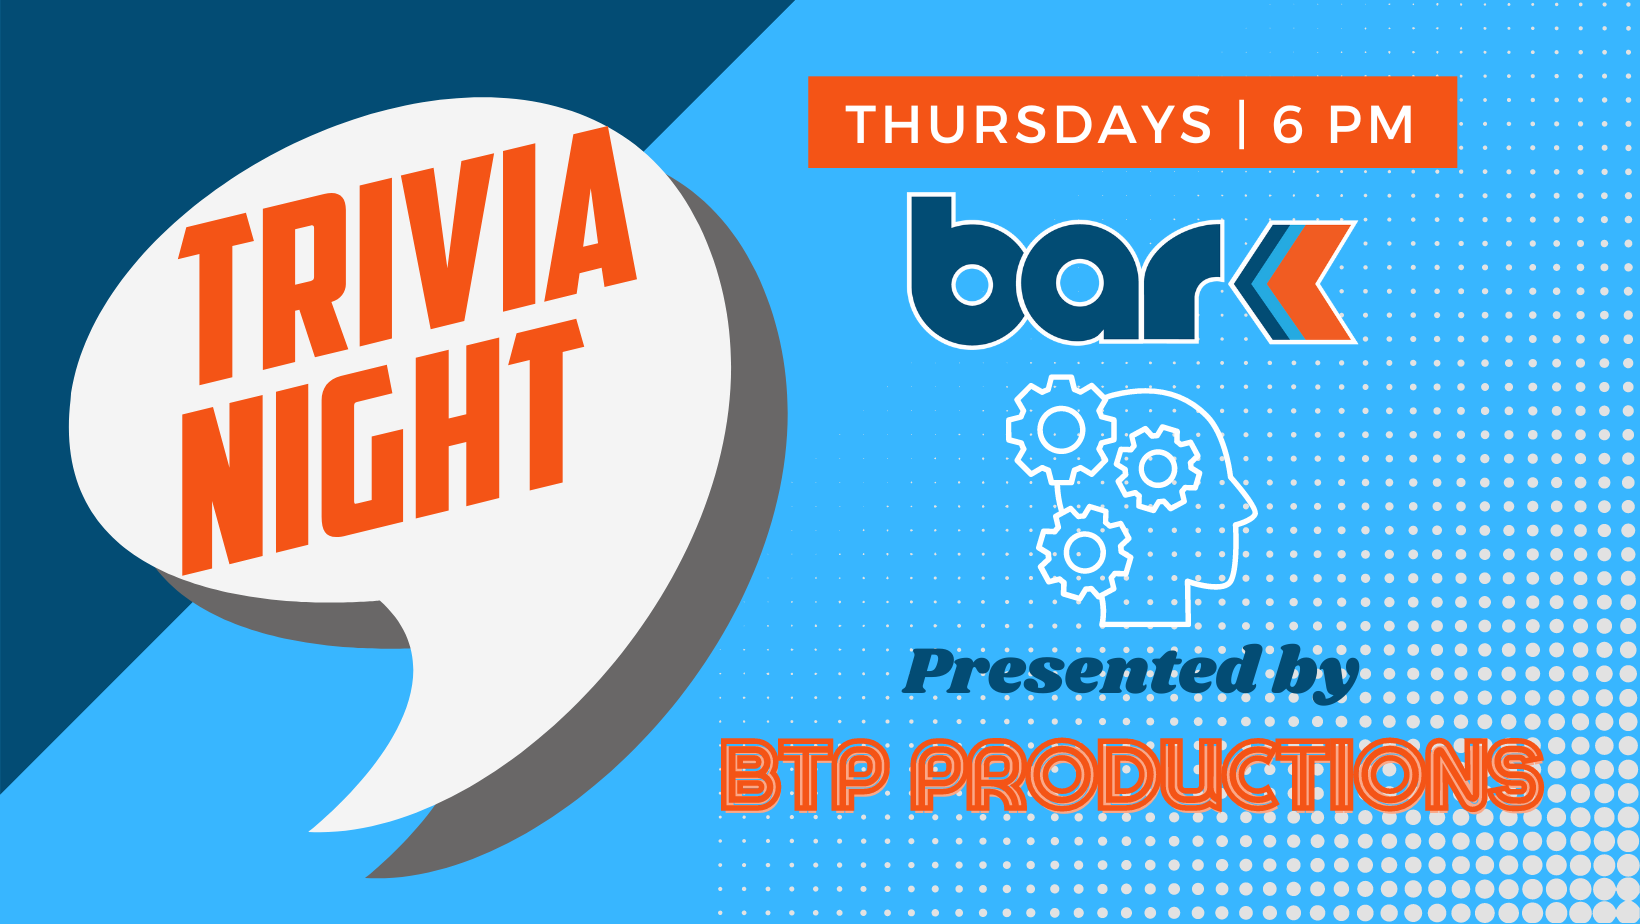 Trivia night presented by BTP productions at Bar K on Thursdays 6 pm.